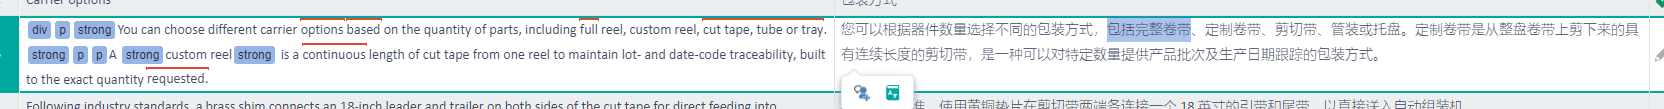 Screenshot of Trados Enterprise Online Editor showing a segment with missing tags and no smart action menu option to add them. Some text is highlighted in blue, indicating a selection. Asian characters are visible in the interface.